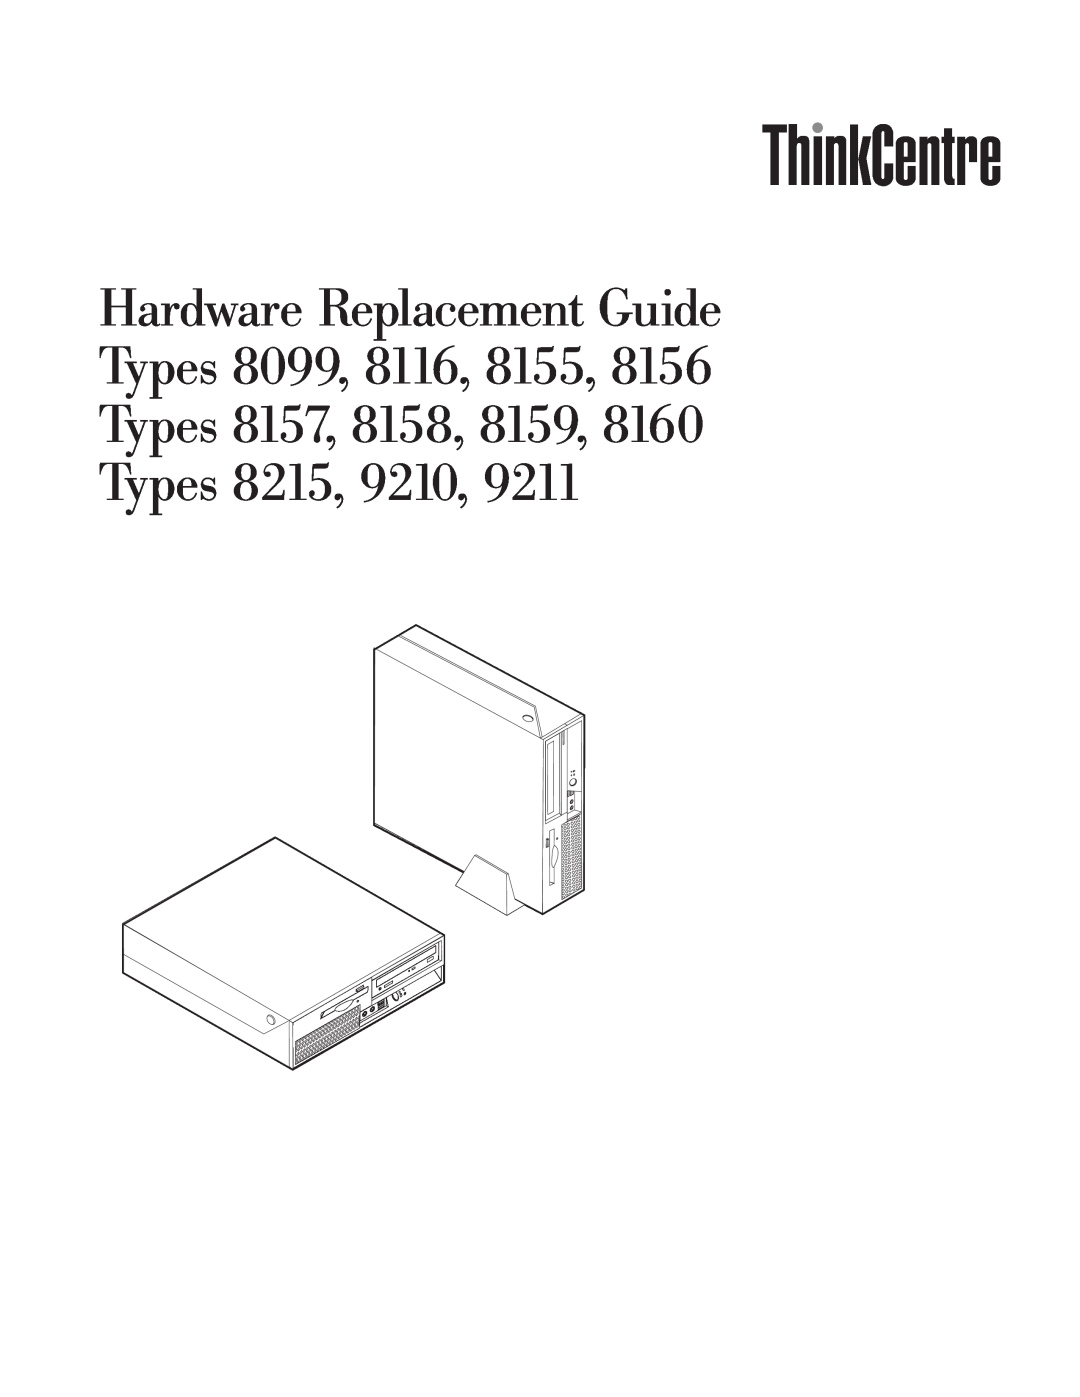 Lenovo 8160 manual Hardware Replacement Guide, Types 8099, 8116, 8155, Types 8157, 8158, 8159, Types 8215 